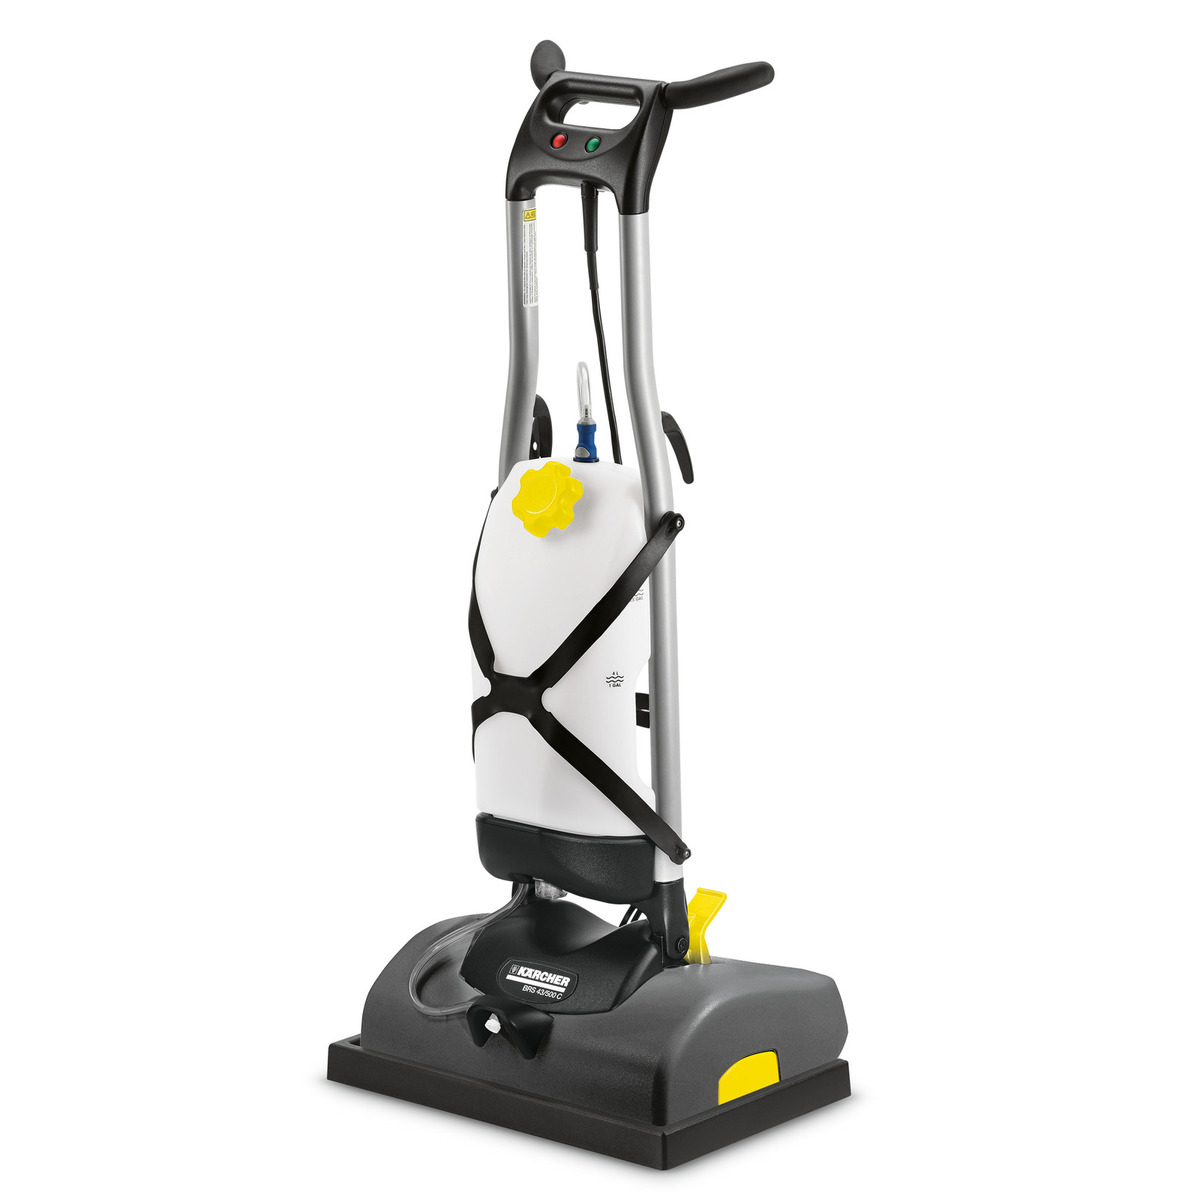 Karcher iCapsol BRS 43/500 C Deluxe karcher, icapsol, BRS, 43/500, deluxe, carpet, cleaning, commercial, compact, machine, cleaner, rug, shampooer, shampoo, extraction, 